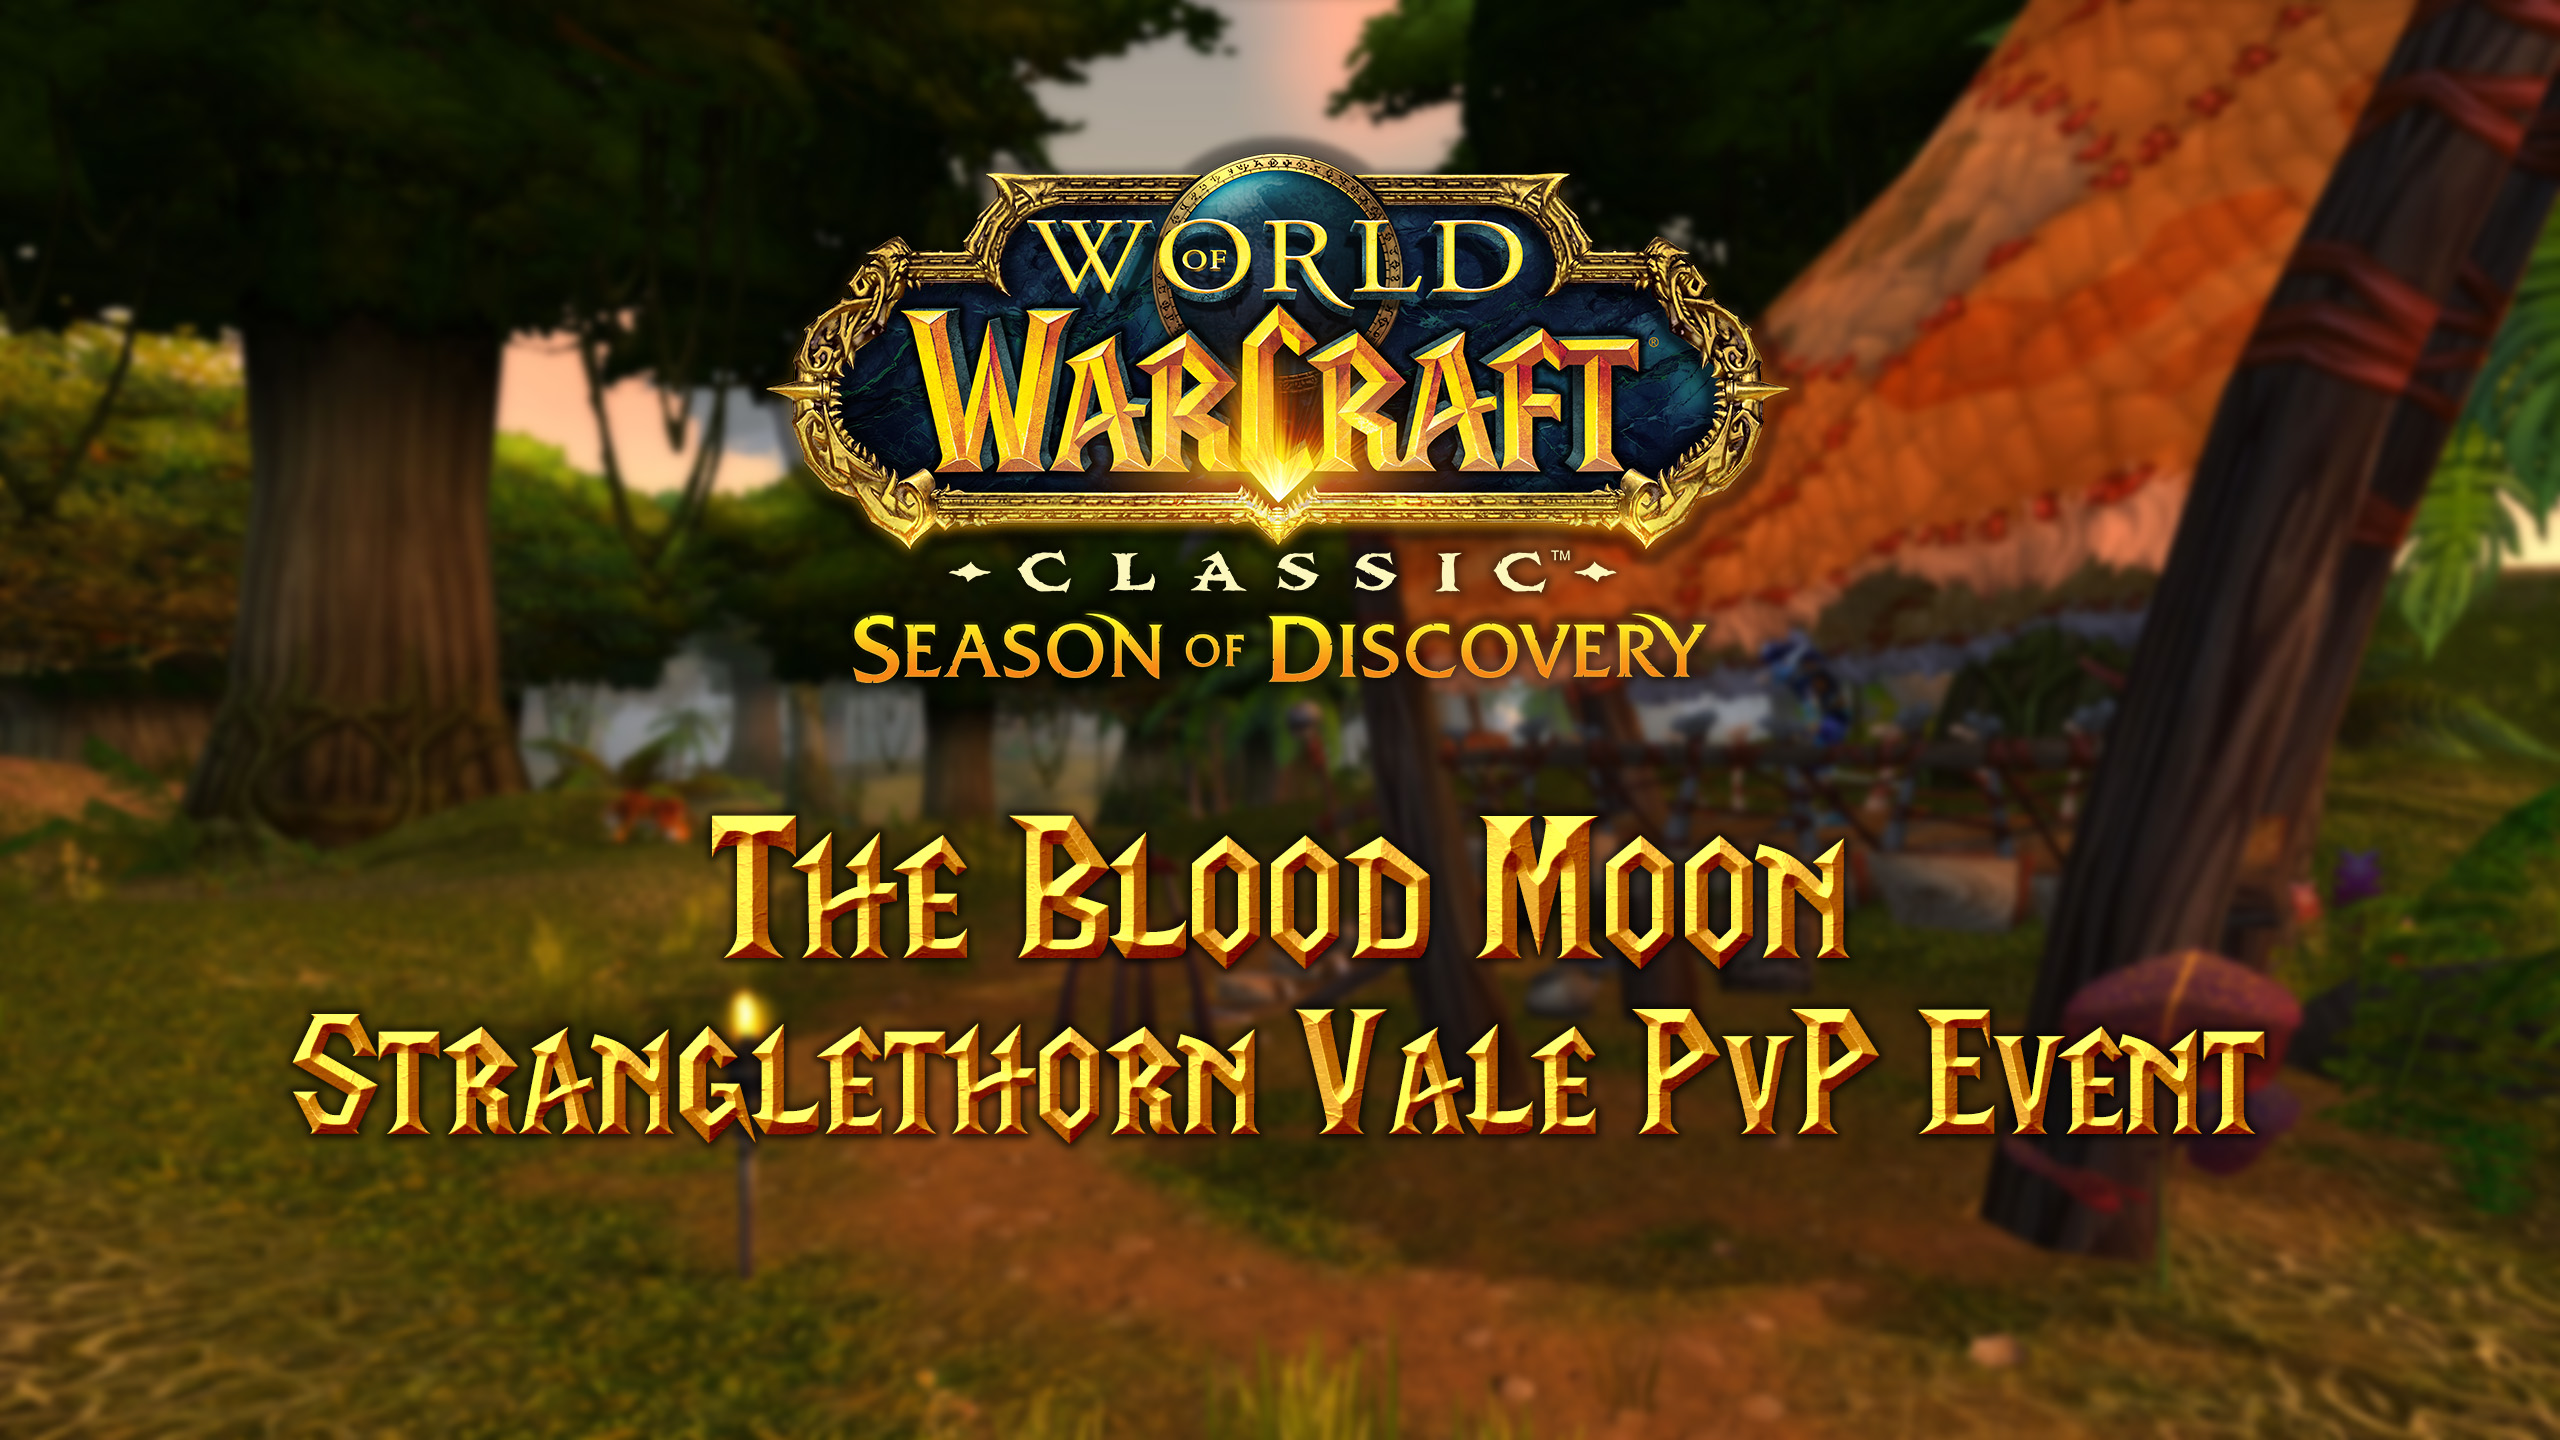 The Blood Moon Stranglethorn Vale PvP Event Guide for Season of Discovery (SoD)